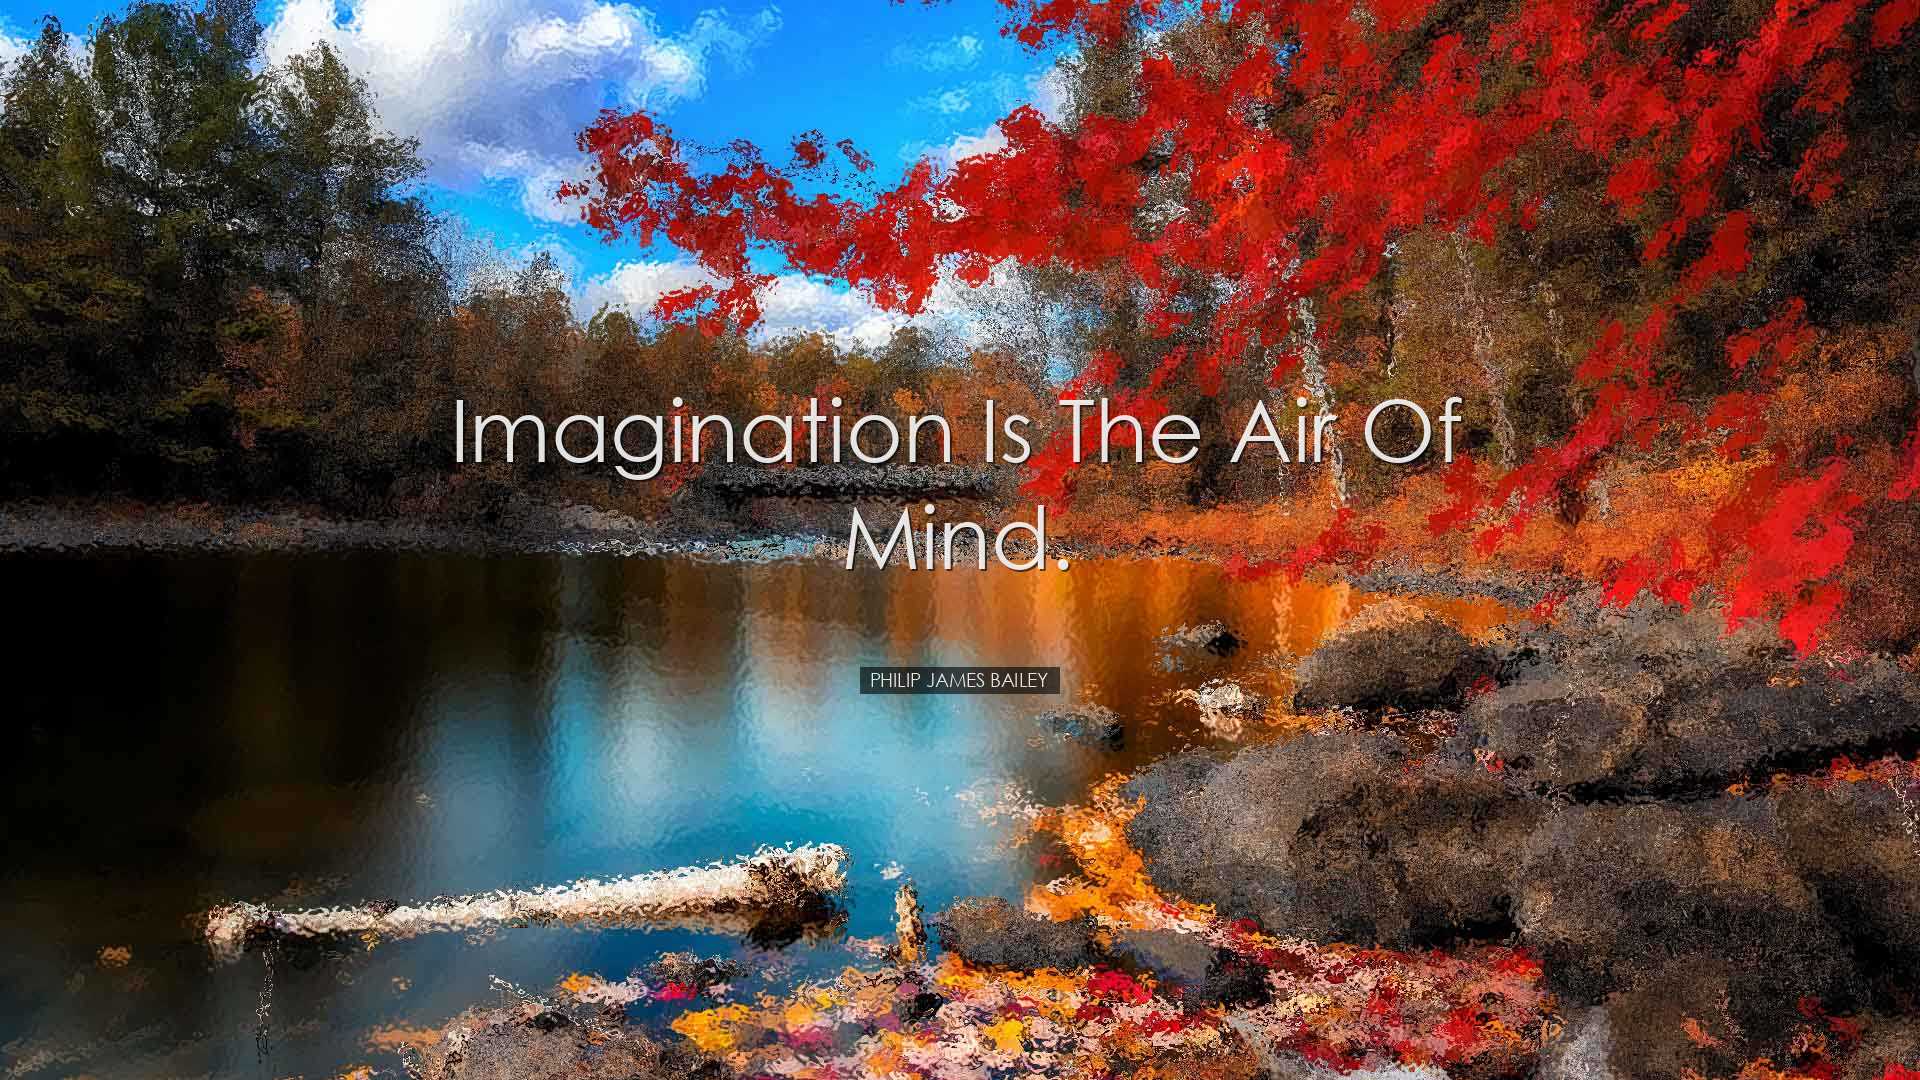 Imagination is the air of mind. - Philip James Bailey